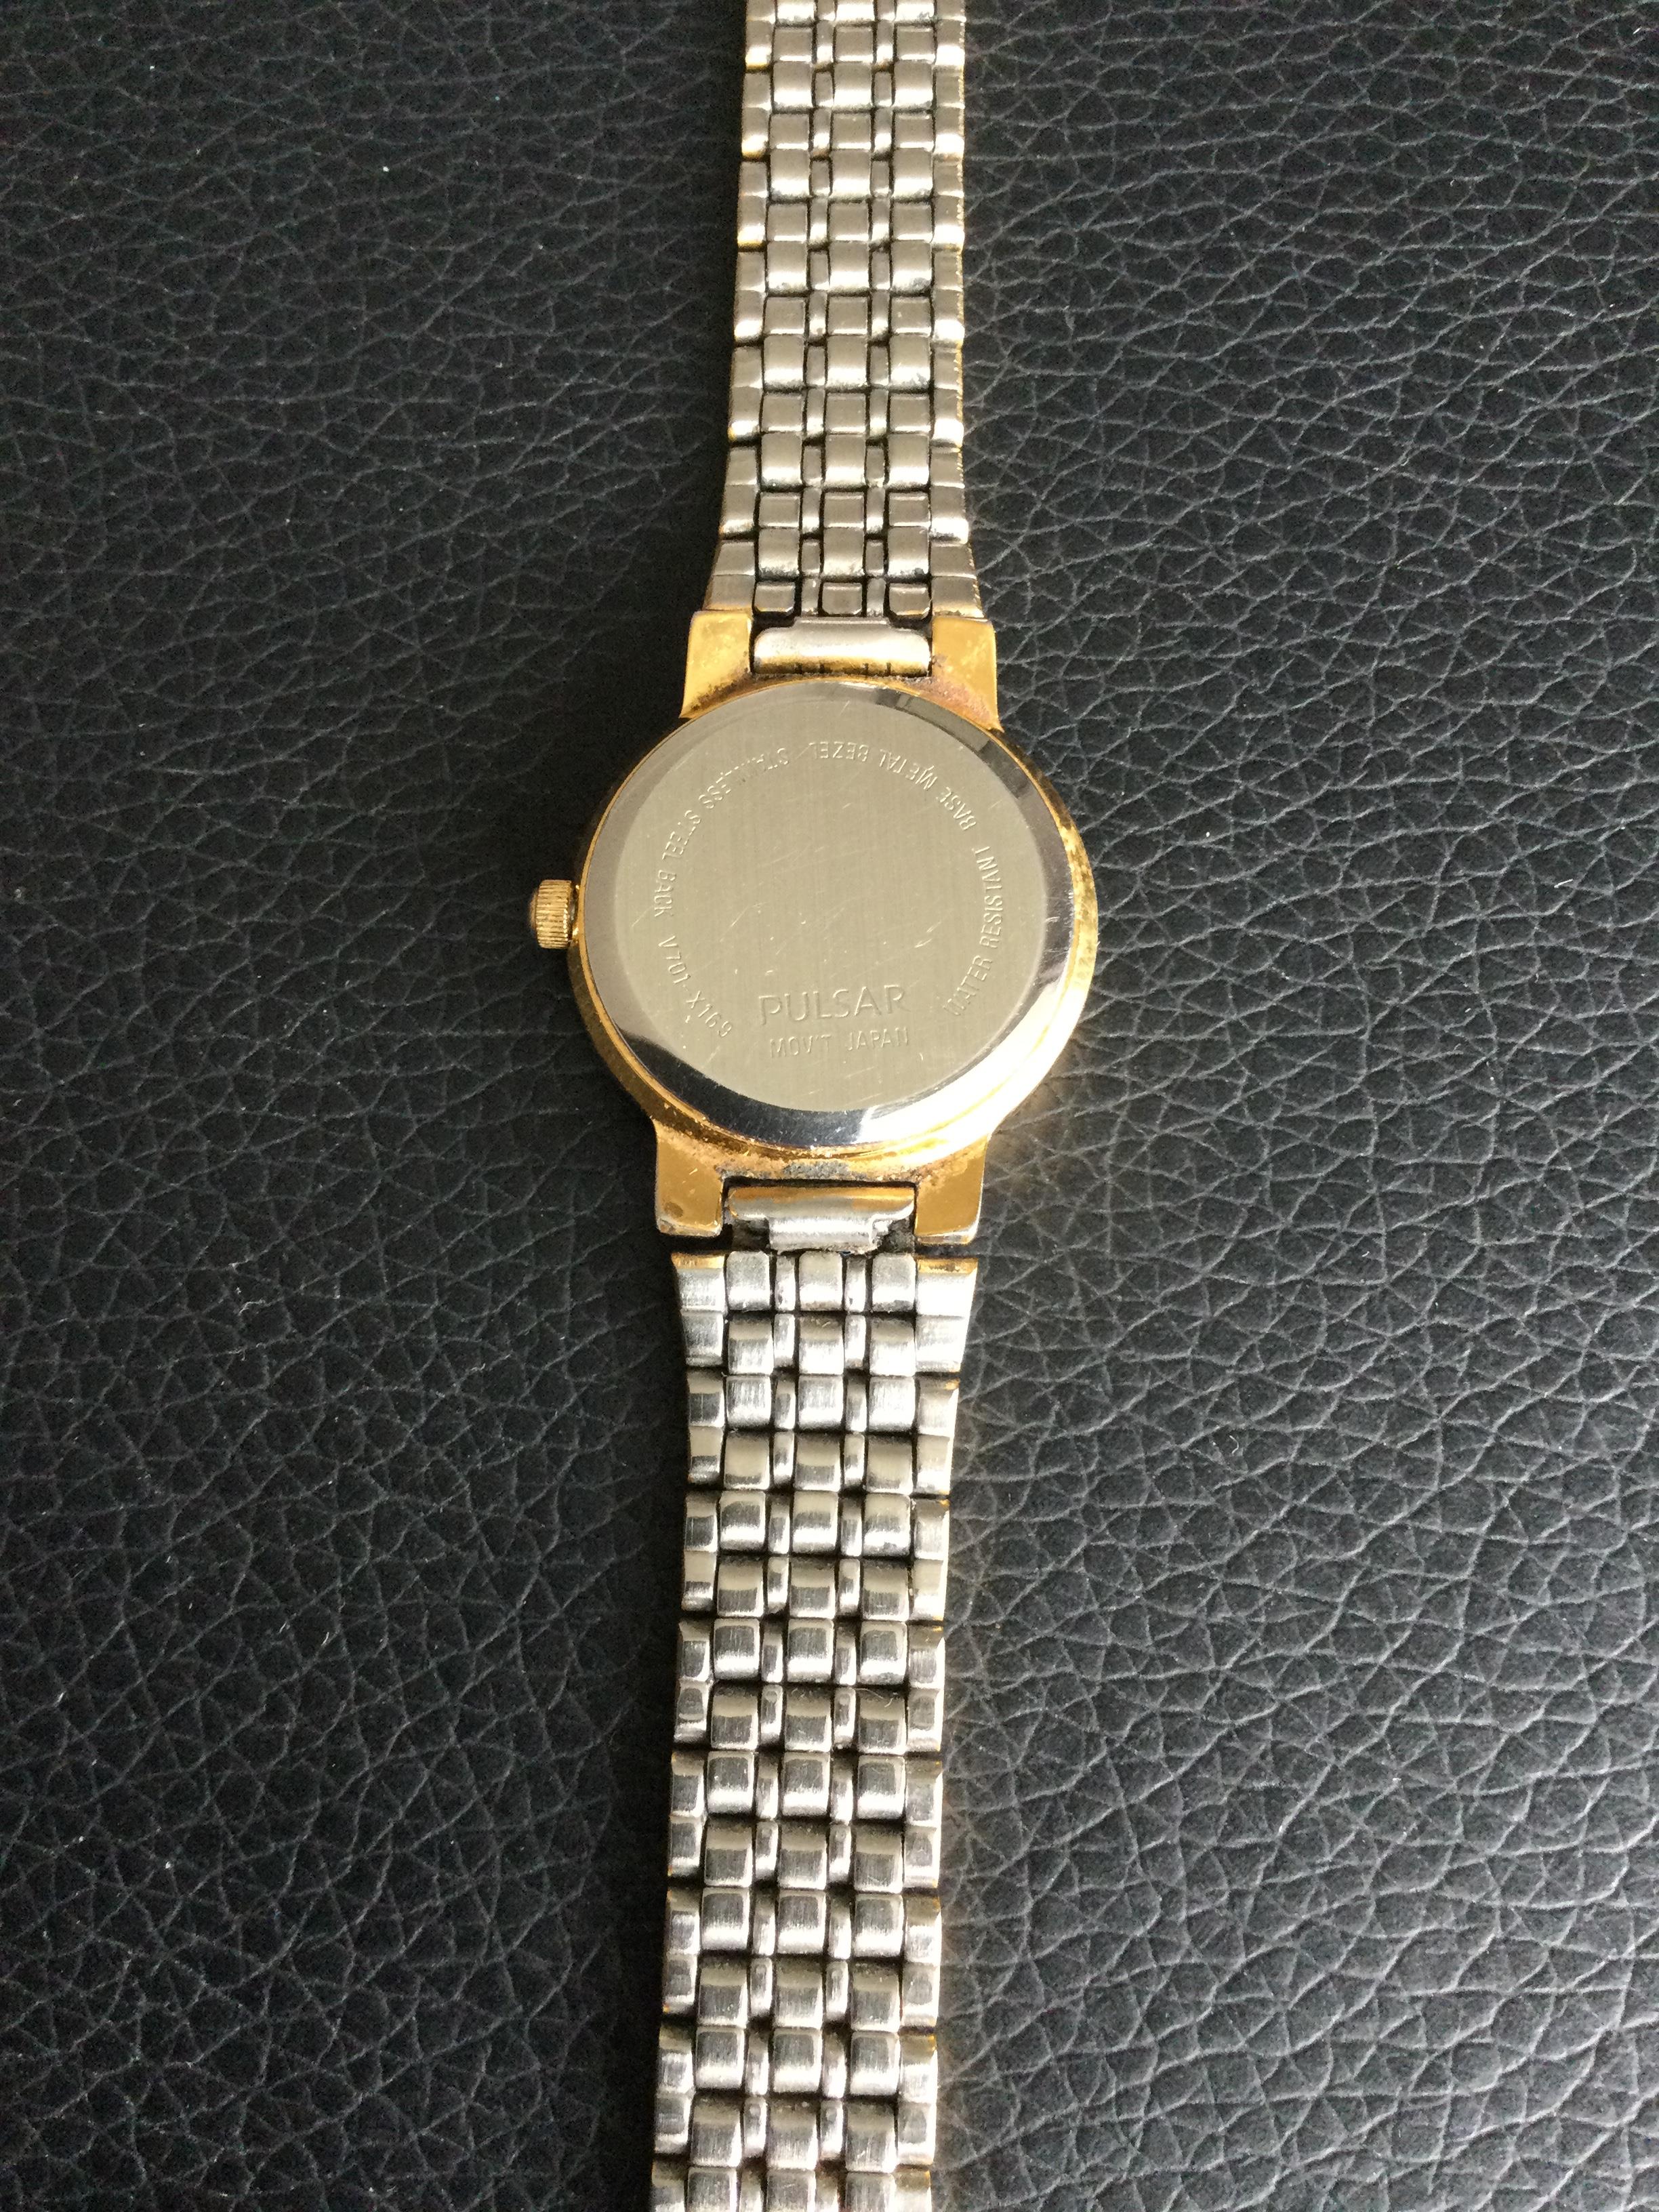 Lovely Pulsar Gold Plated Ladies Wristwatch (GS 44) - Image 6 of 6